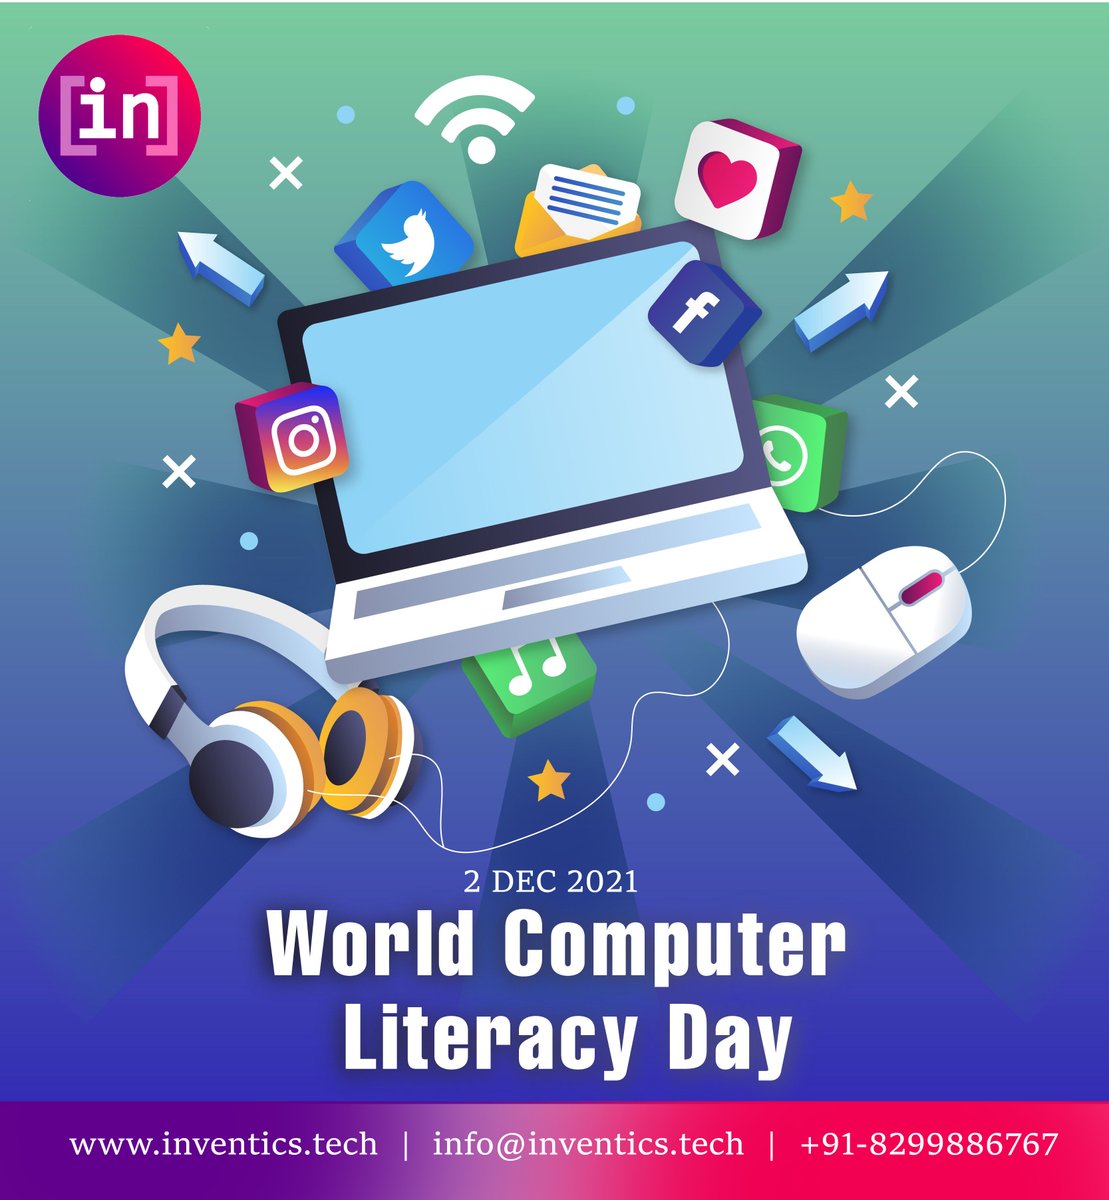 Computer day. World Computer Literacy Day. Computer Literacy. Computer Literacy Day.